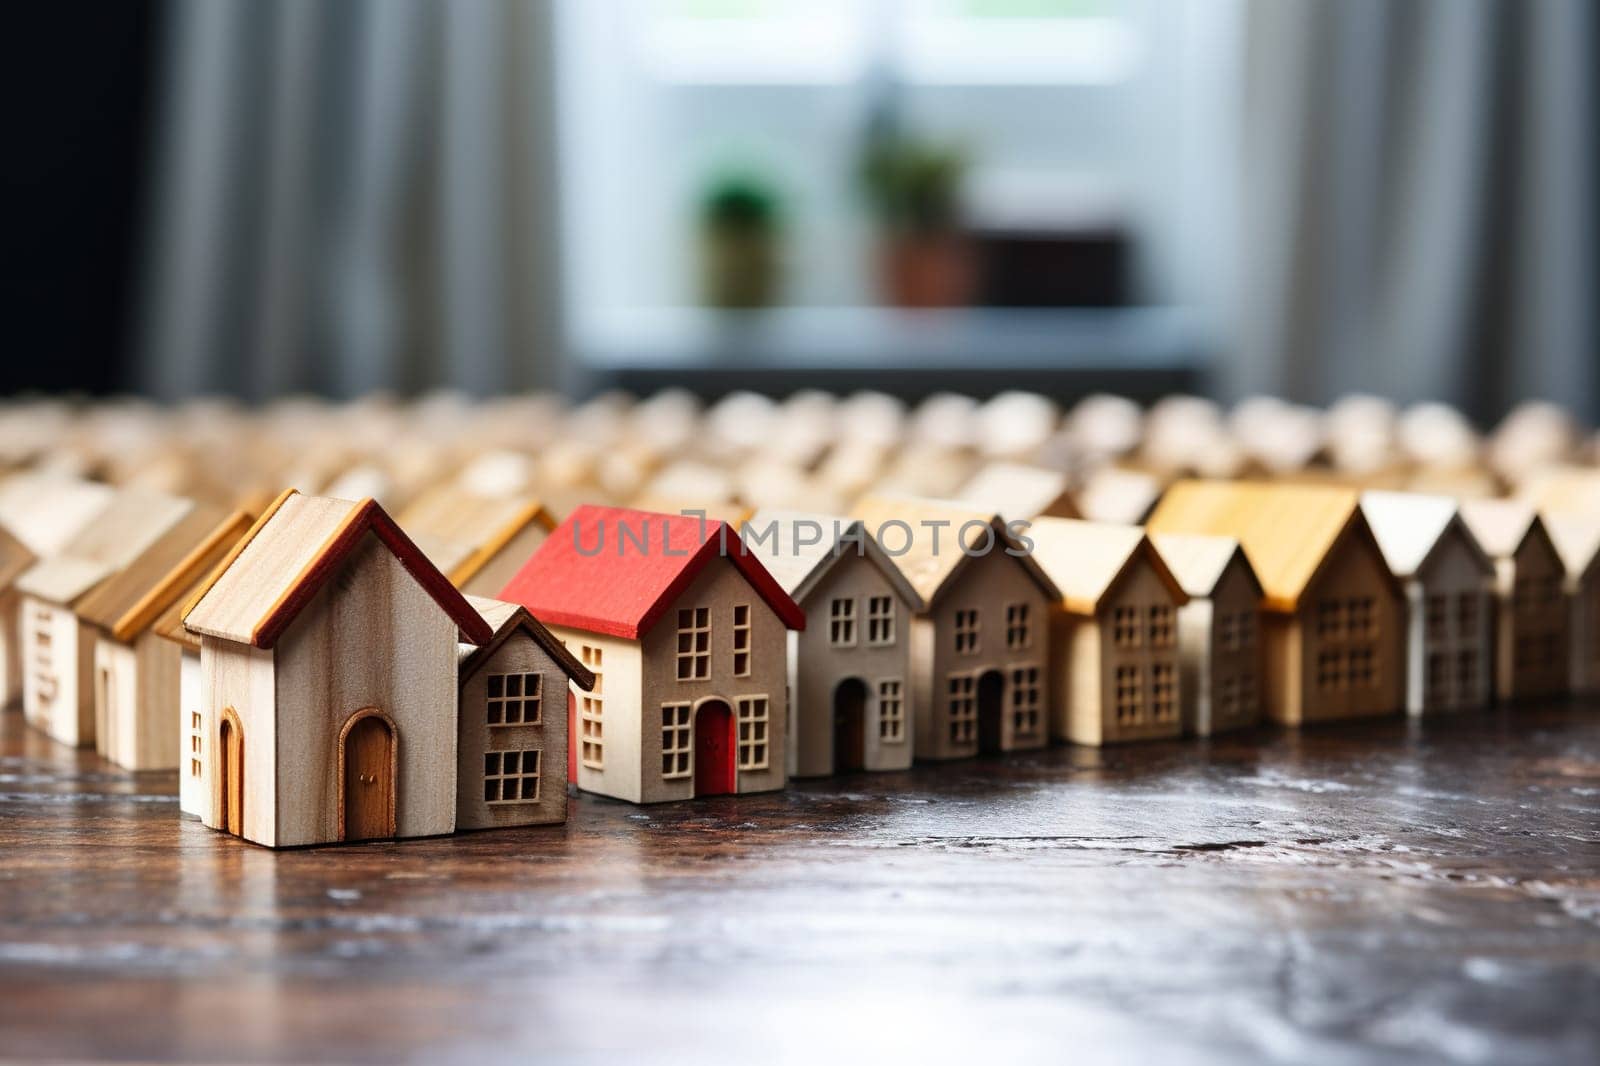 Small wooden house models on a wooden surface with bokeh background. The concept of searching, buying a home.